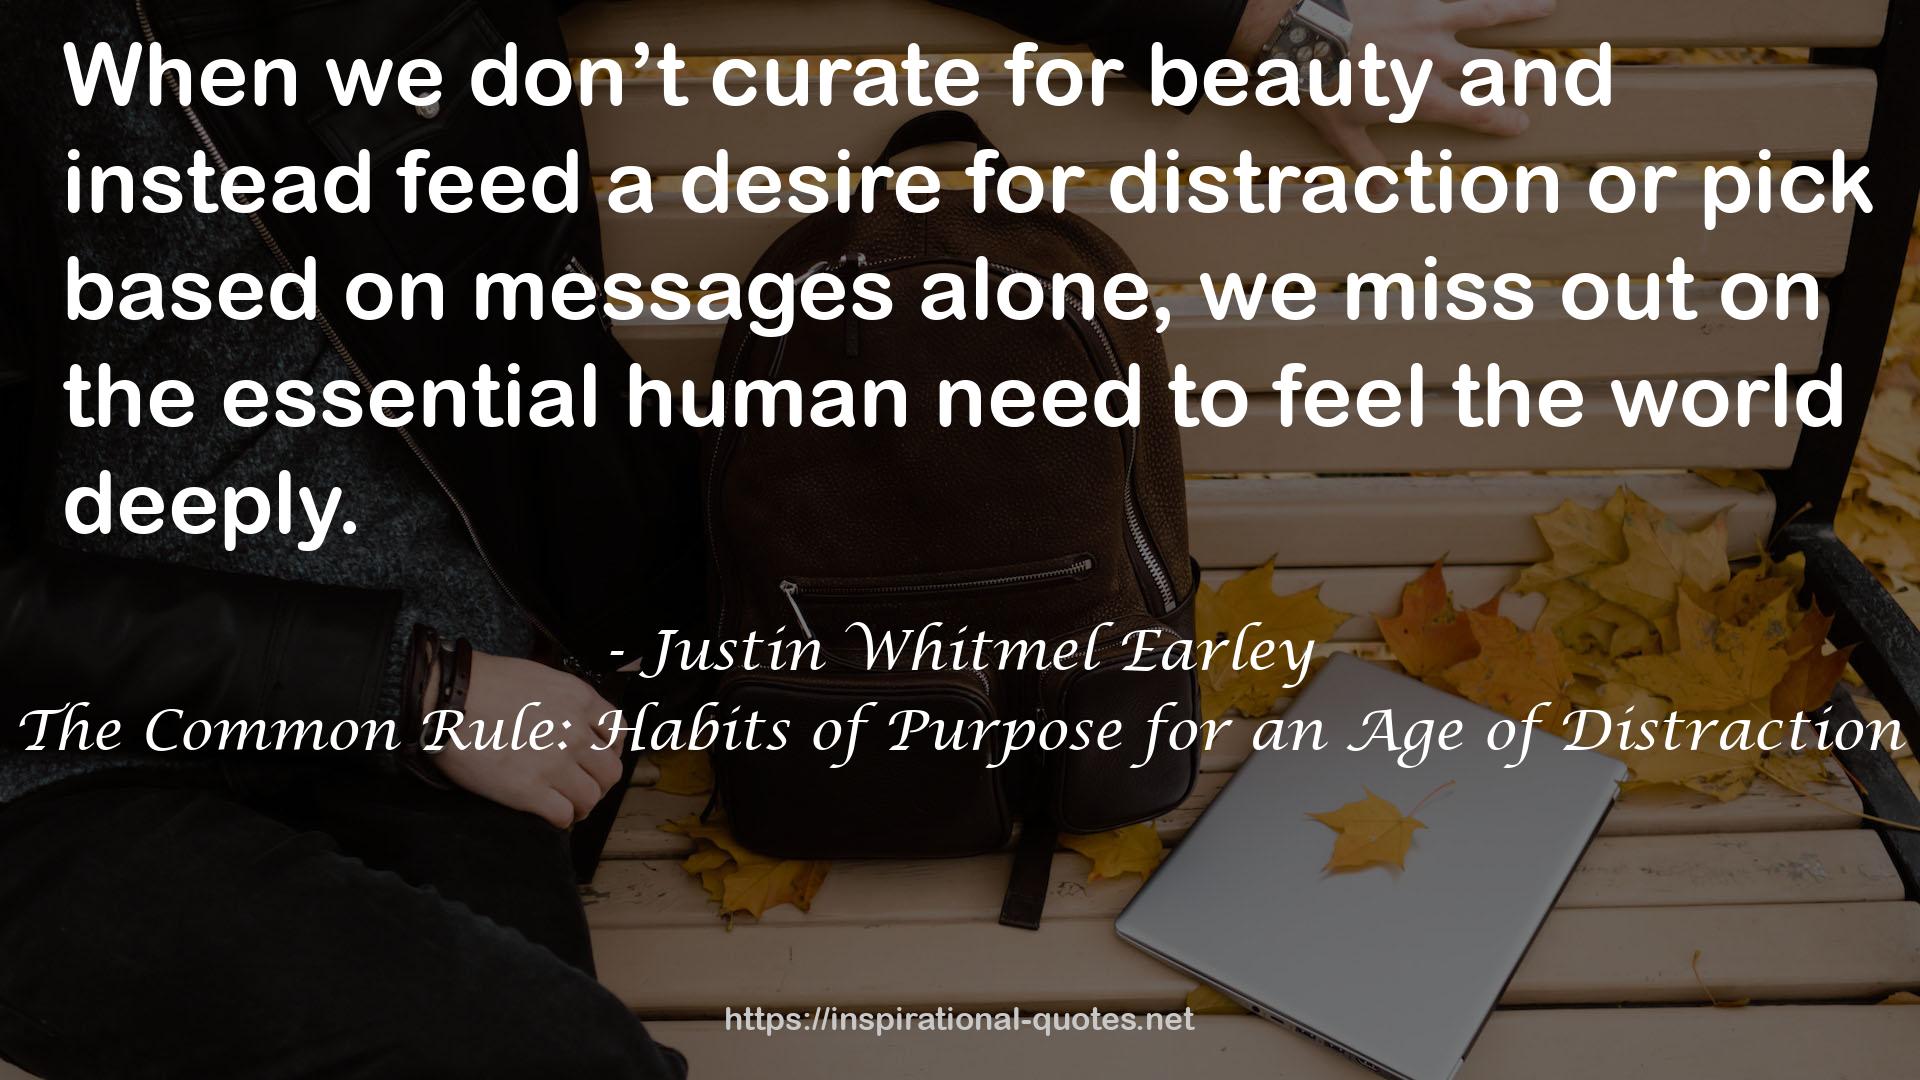 Justin Whitmel Earley QUOTES